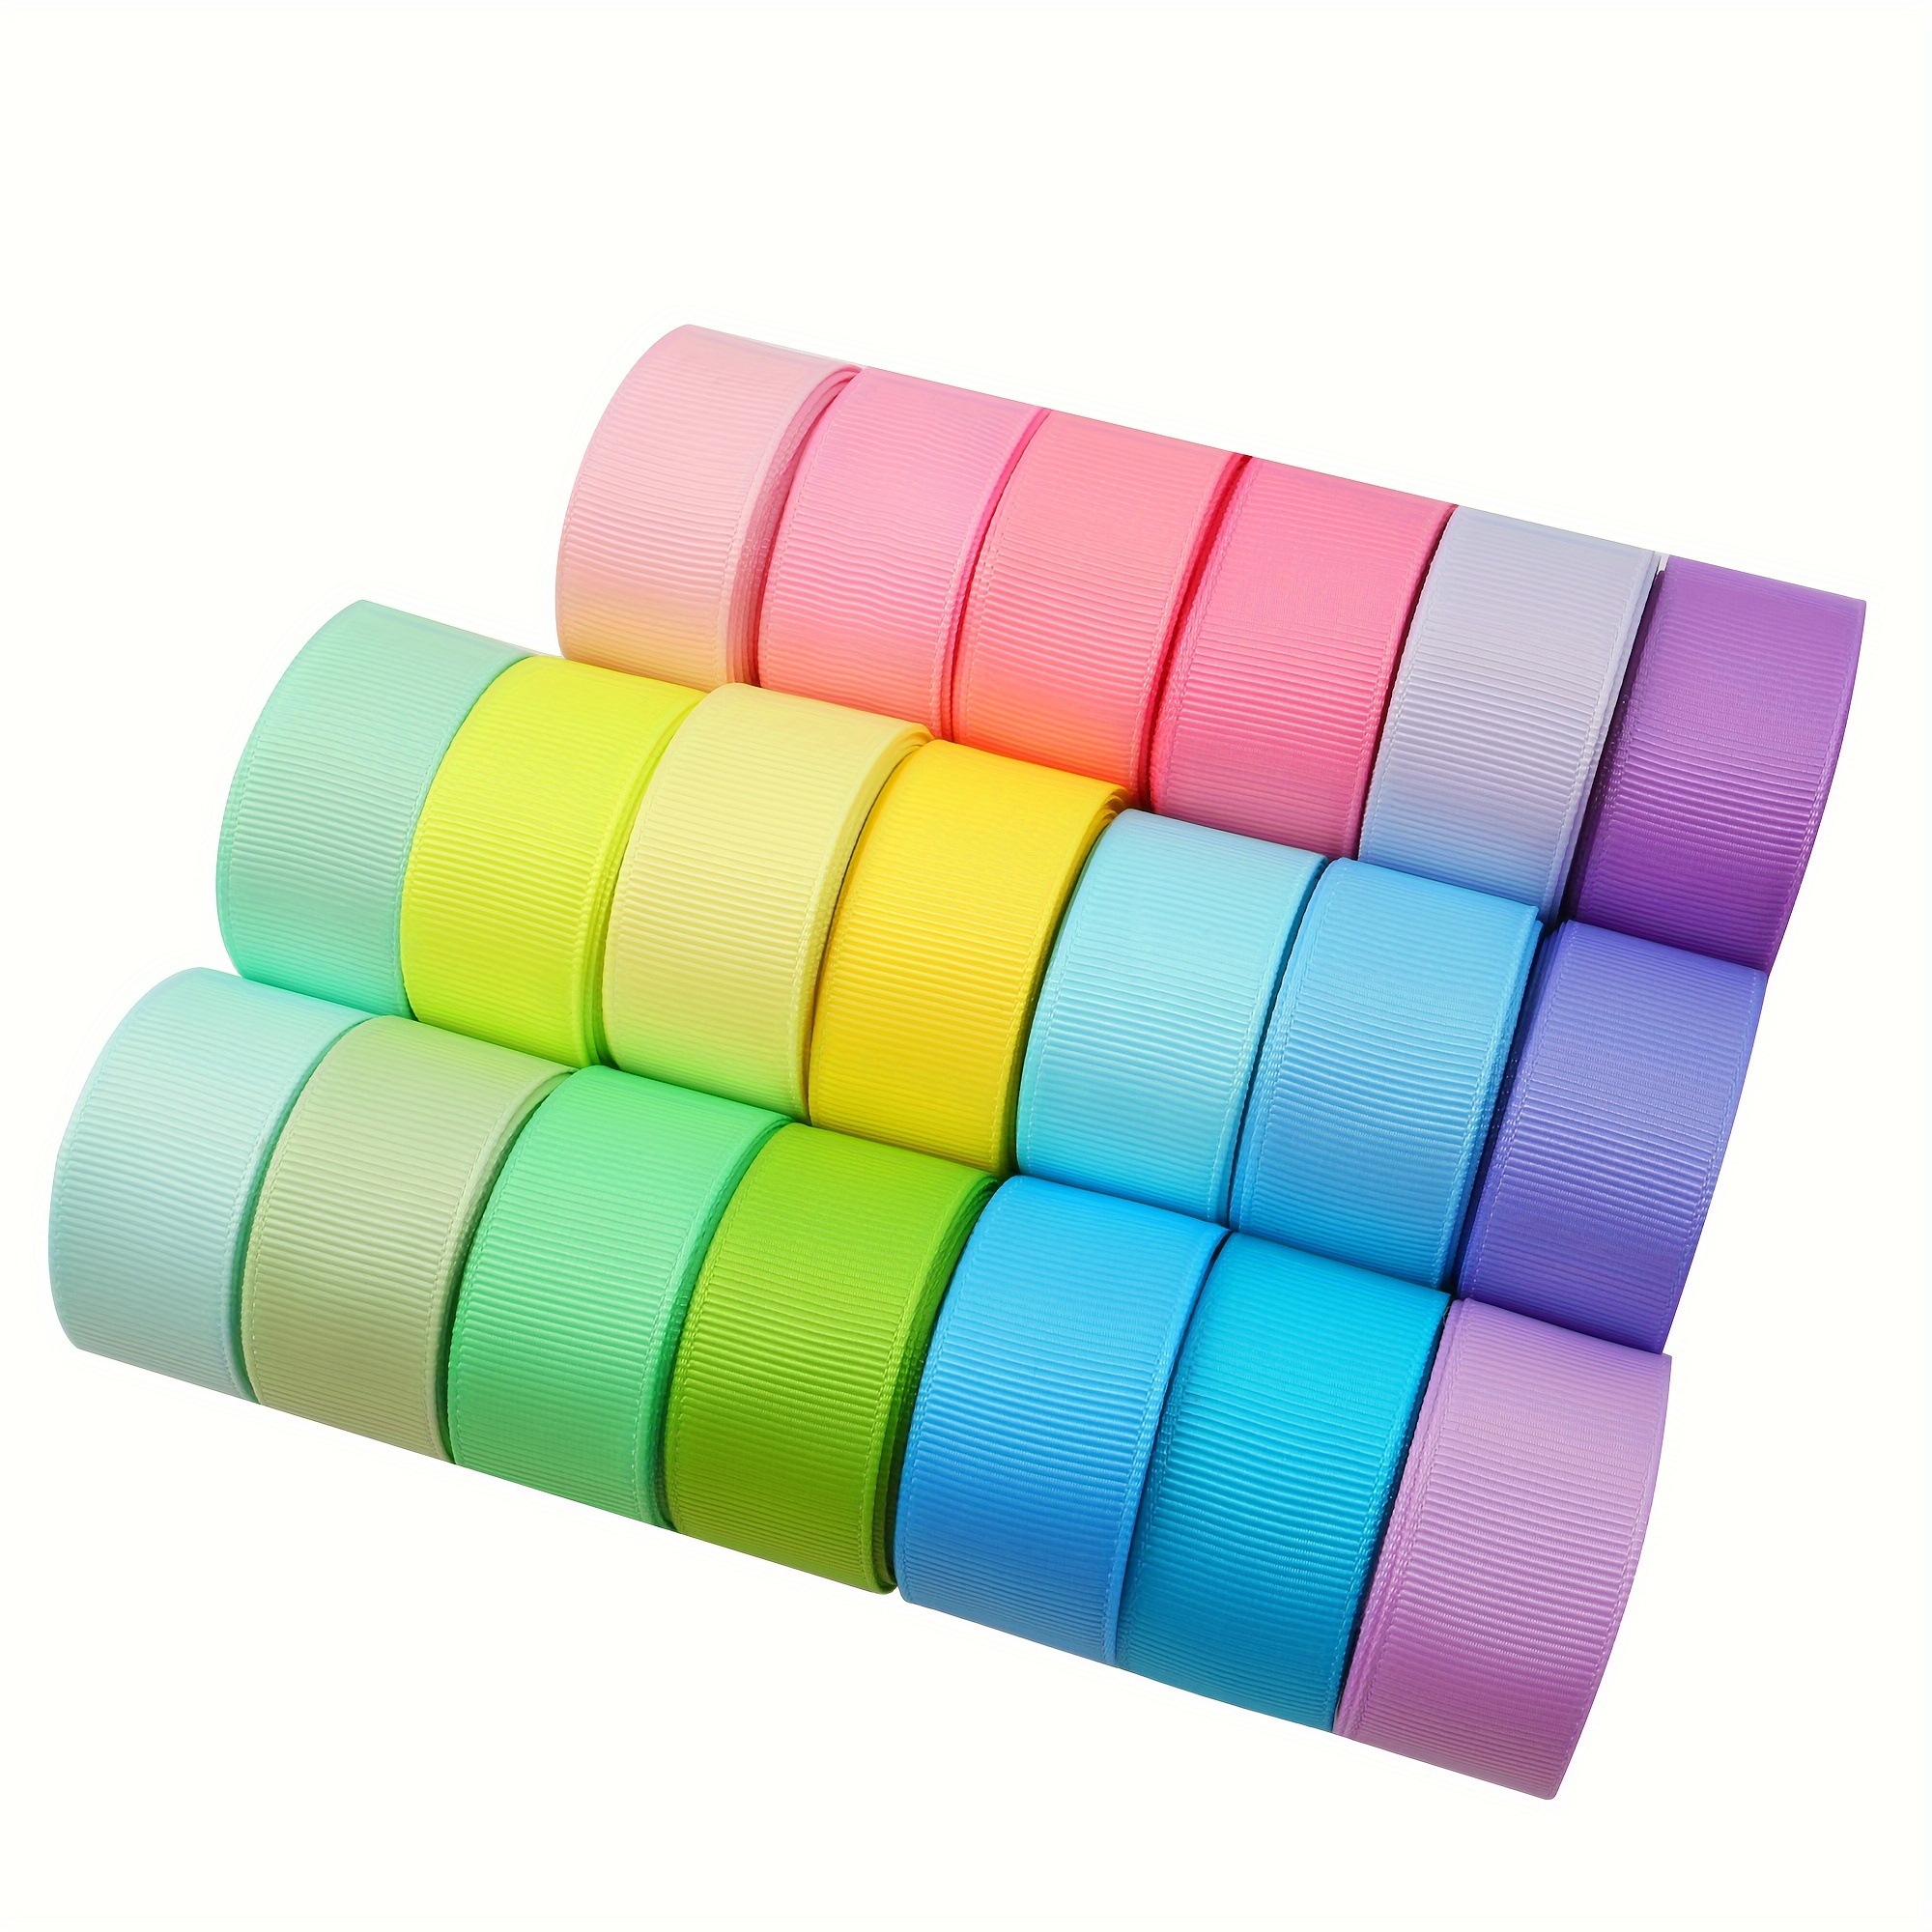 

Set, 40yards/set Pastel Colored Grosgrain Ribbon Roll 22mm Polyester Weaving Ribbon Party Wedding Gift Crafts Bow Birthday Decoration, Diy Clothing Decoration